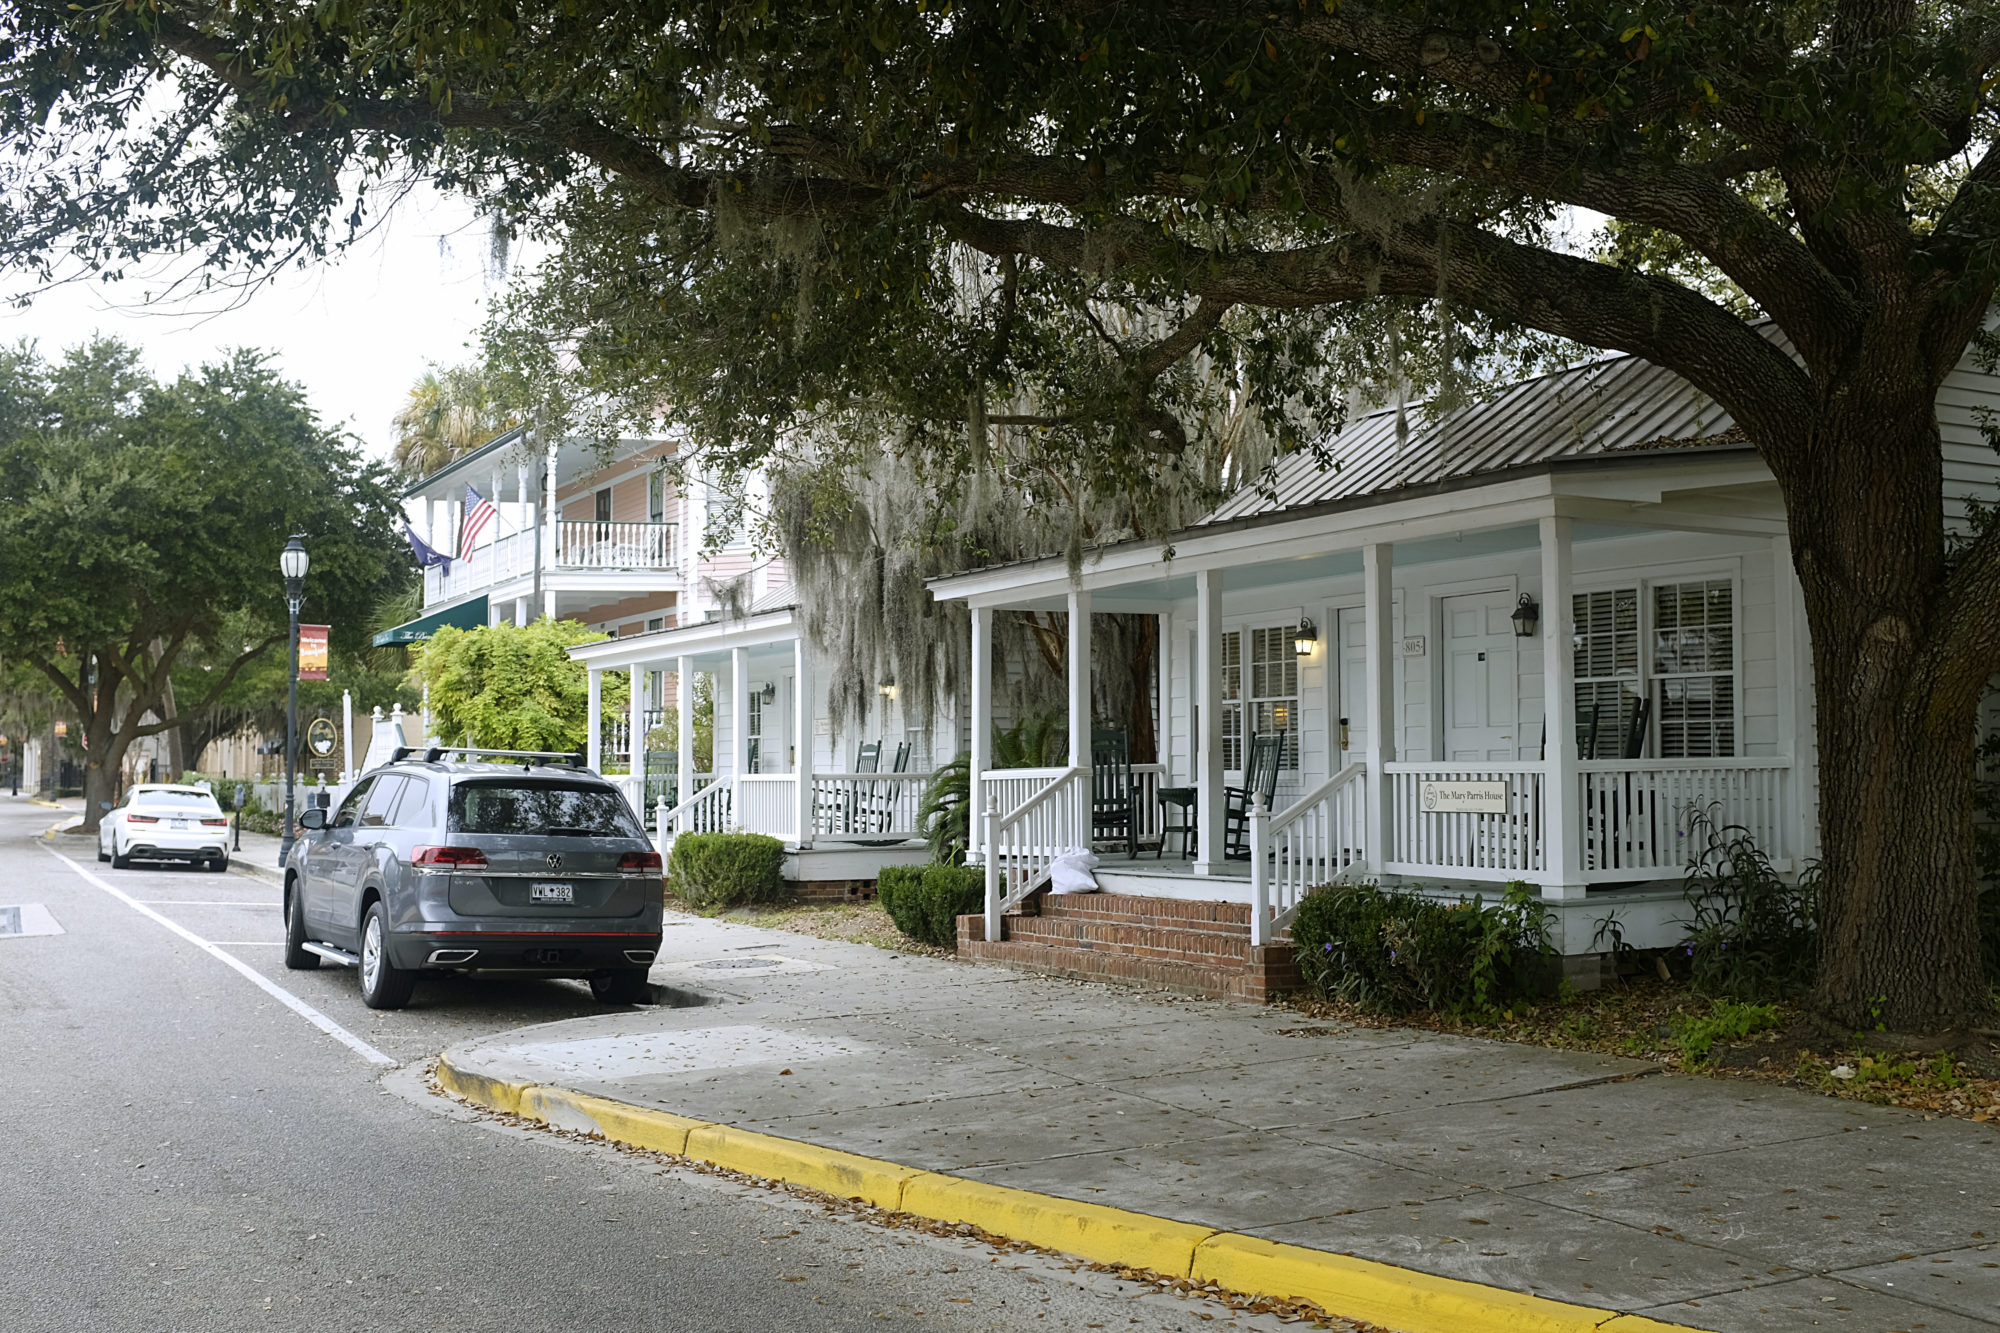 Street view of the Port Republic Cottages